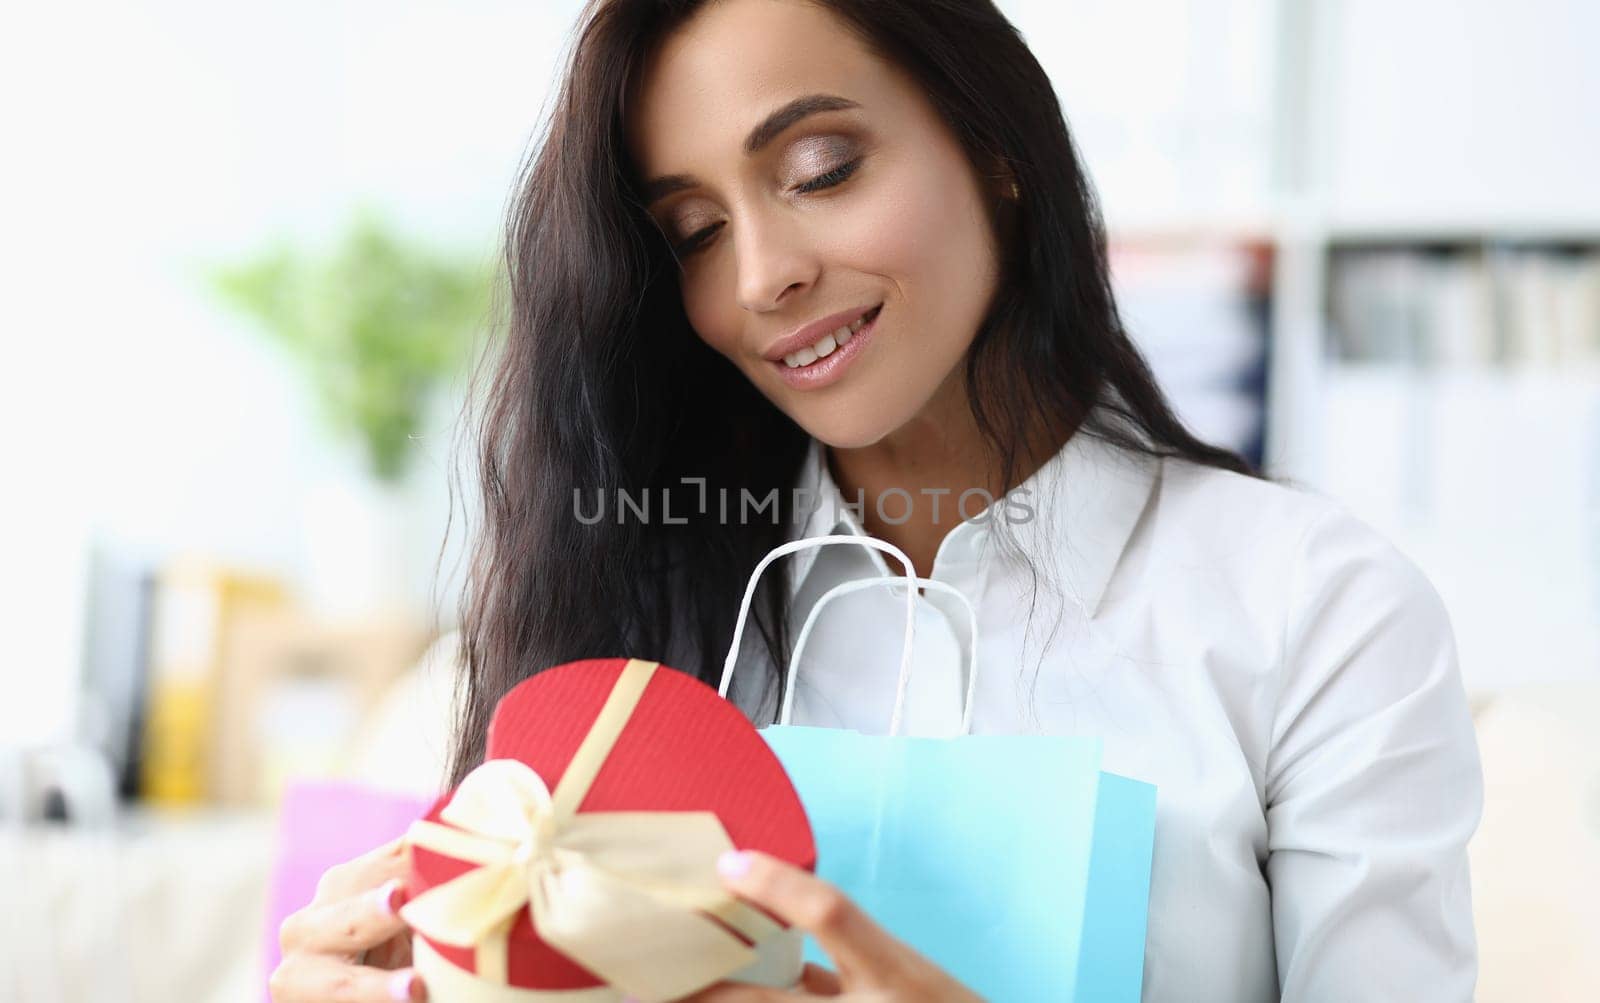 eautiful young woman enjoying gift at home by kuprevich